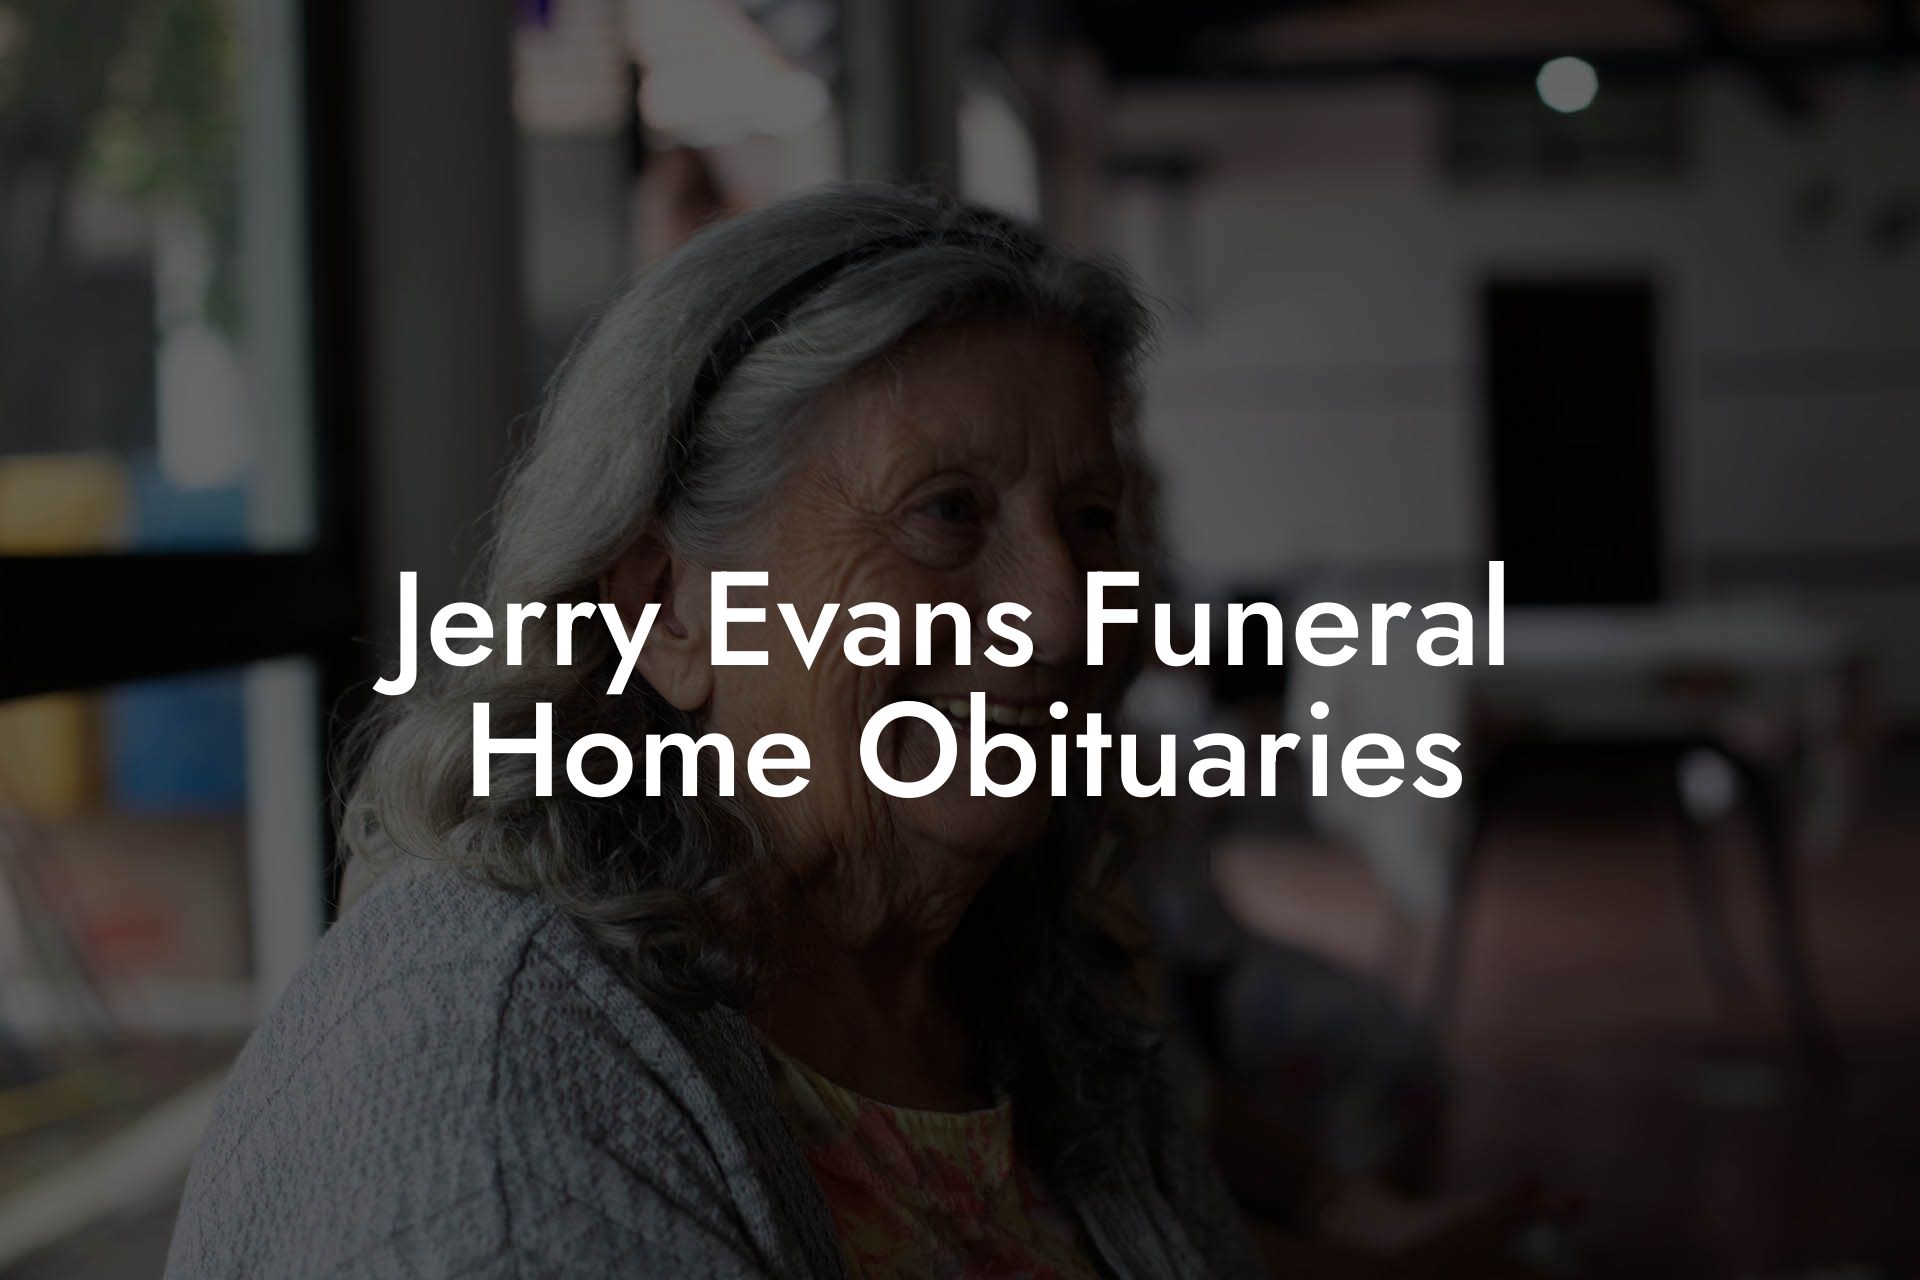 Jerry Evans Funeral Home Obituaries